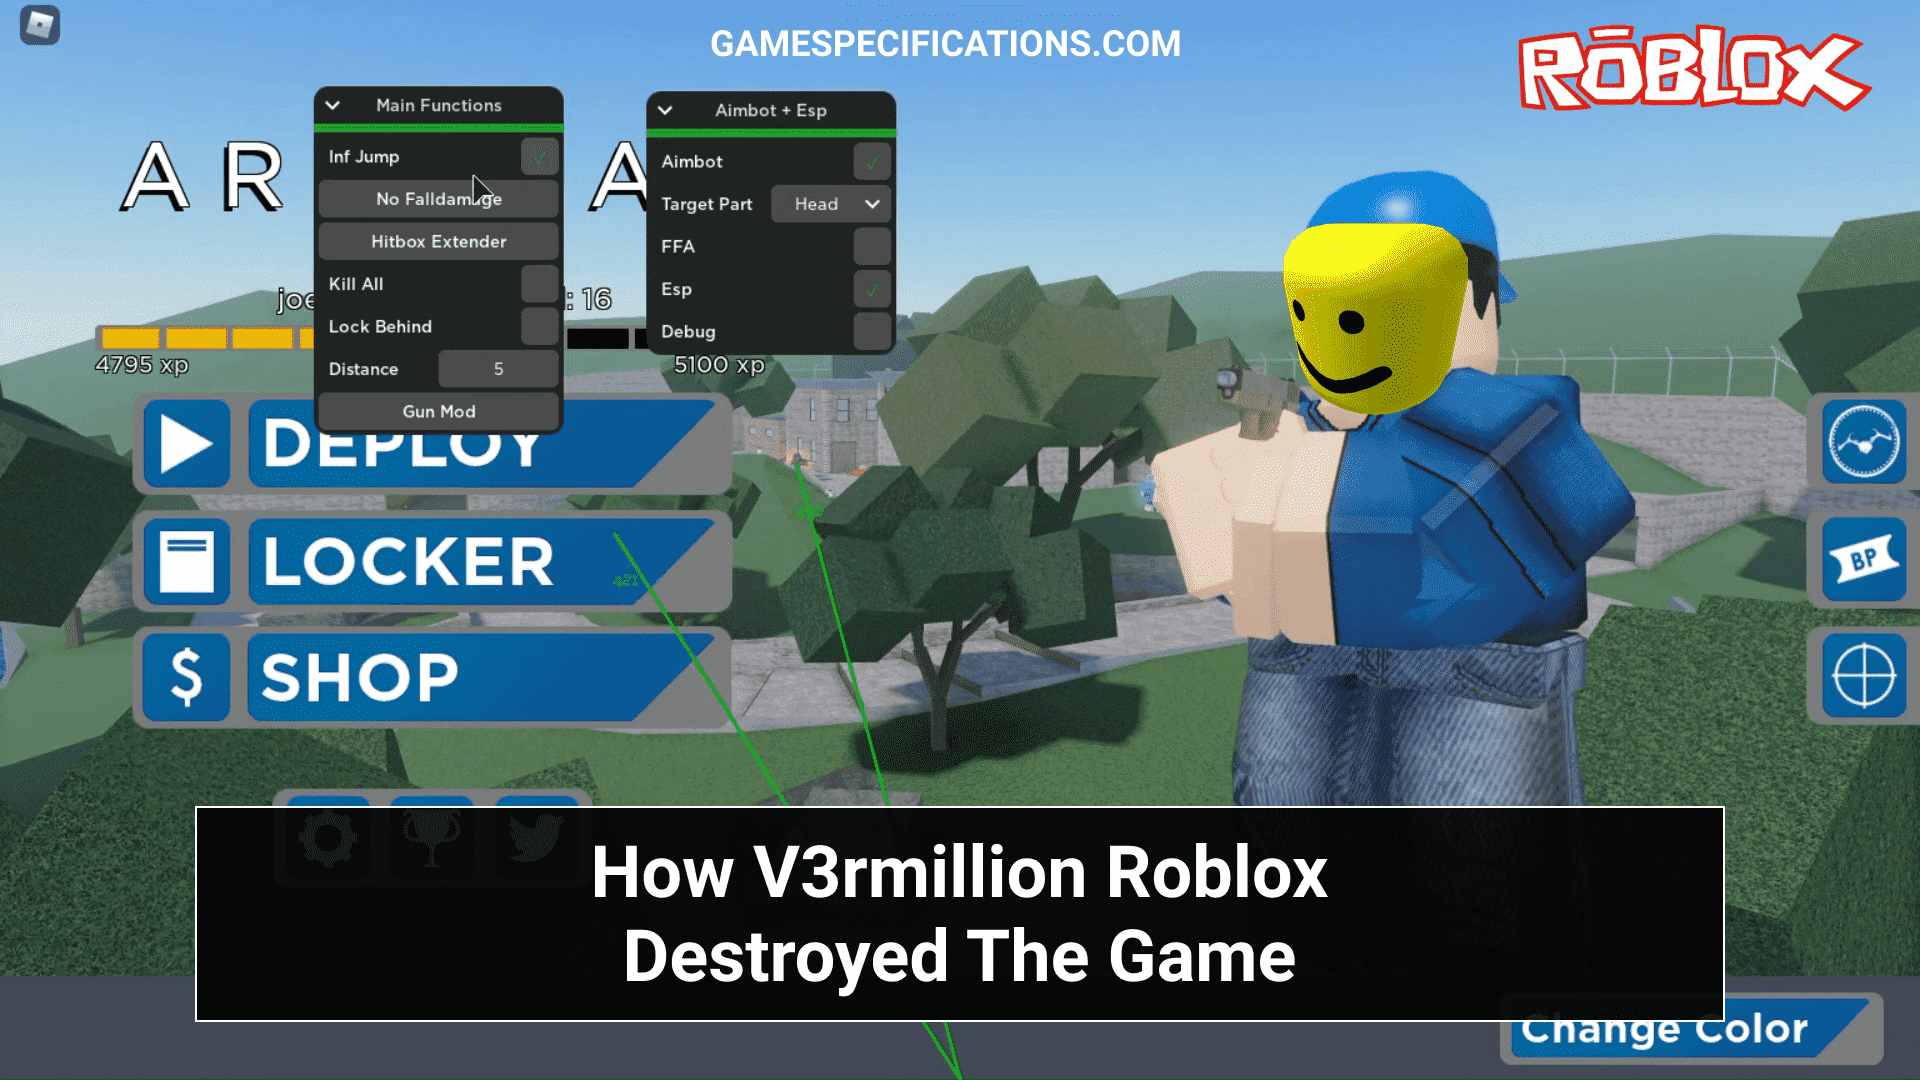 V3rmillion Roblox Breaked The Game By Using Powerful Exploits And Scripts Game Specifications - how to make a shift run script in roblox